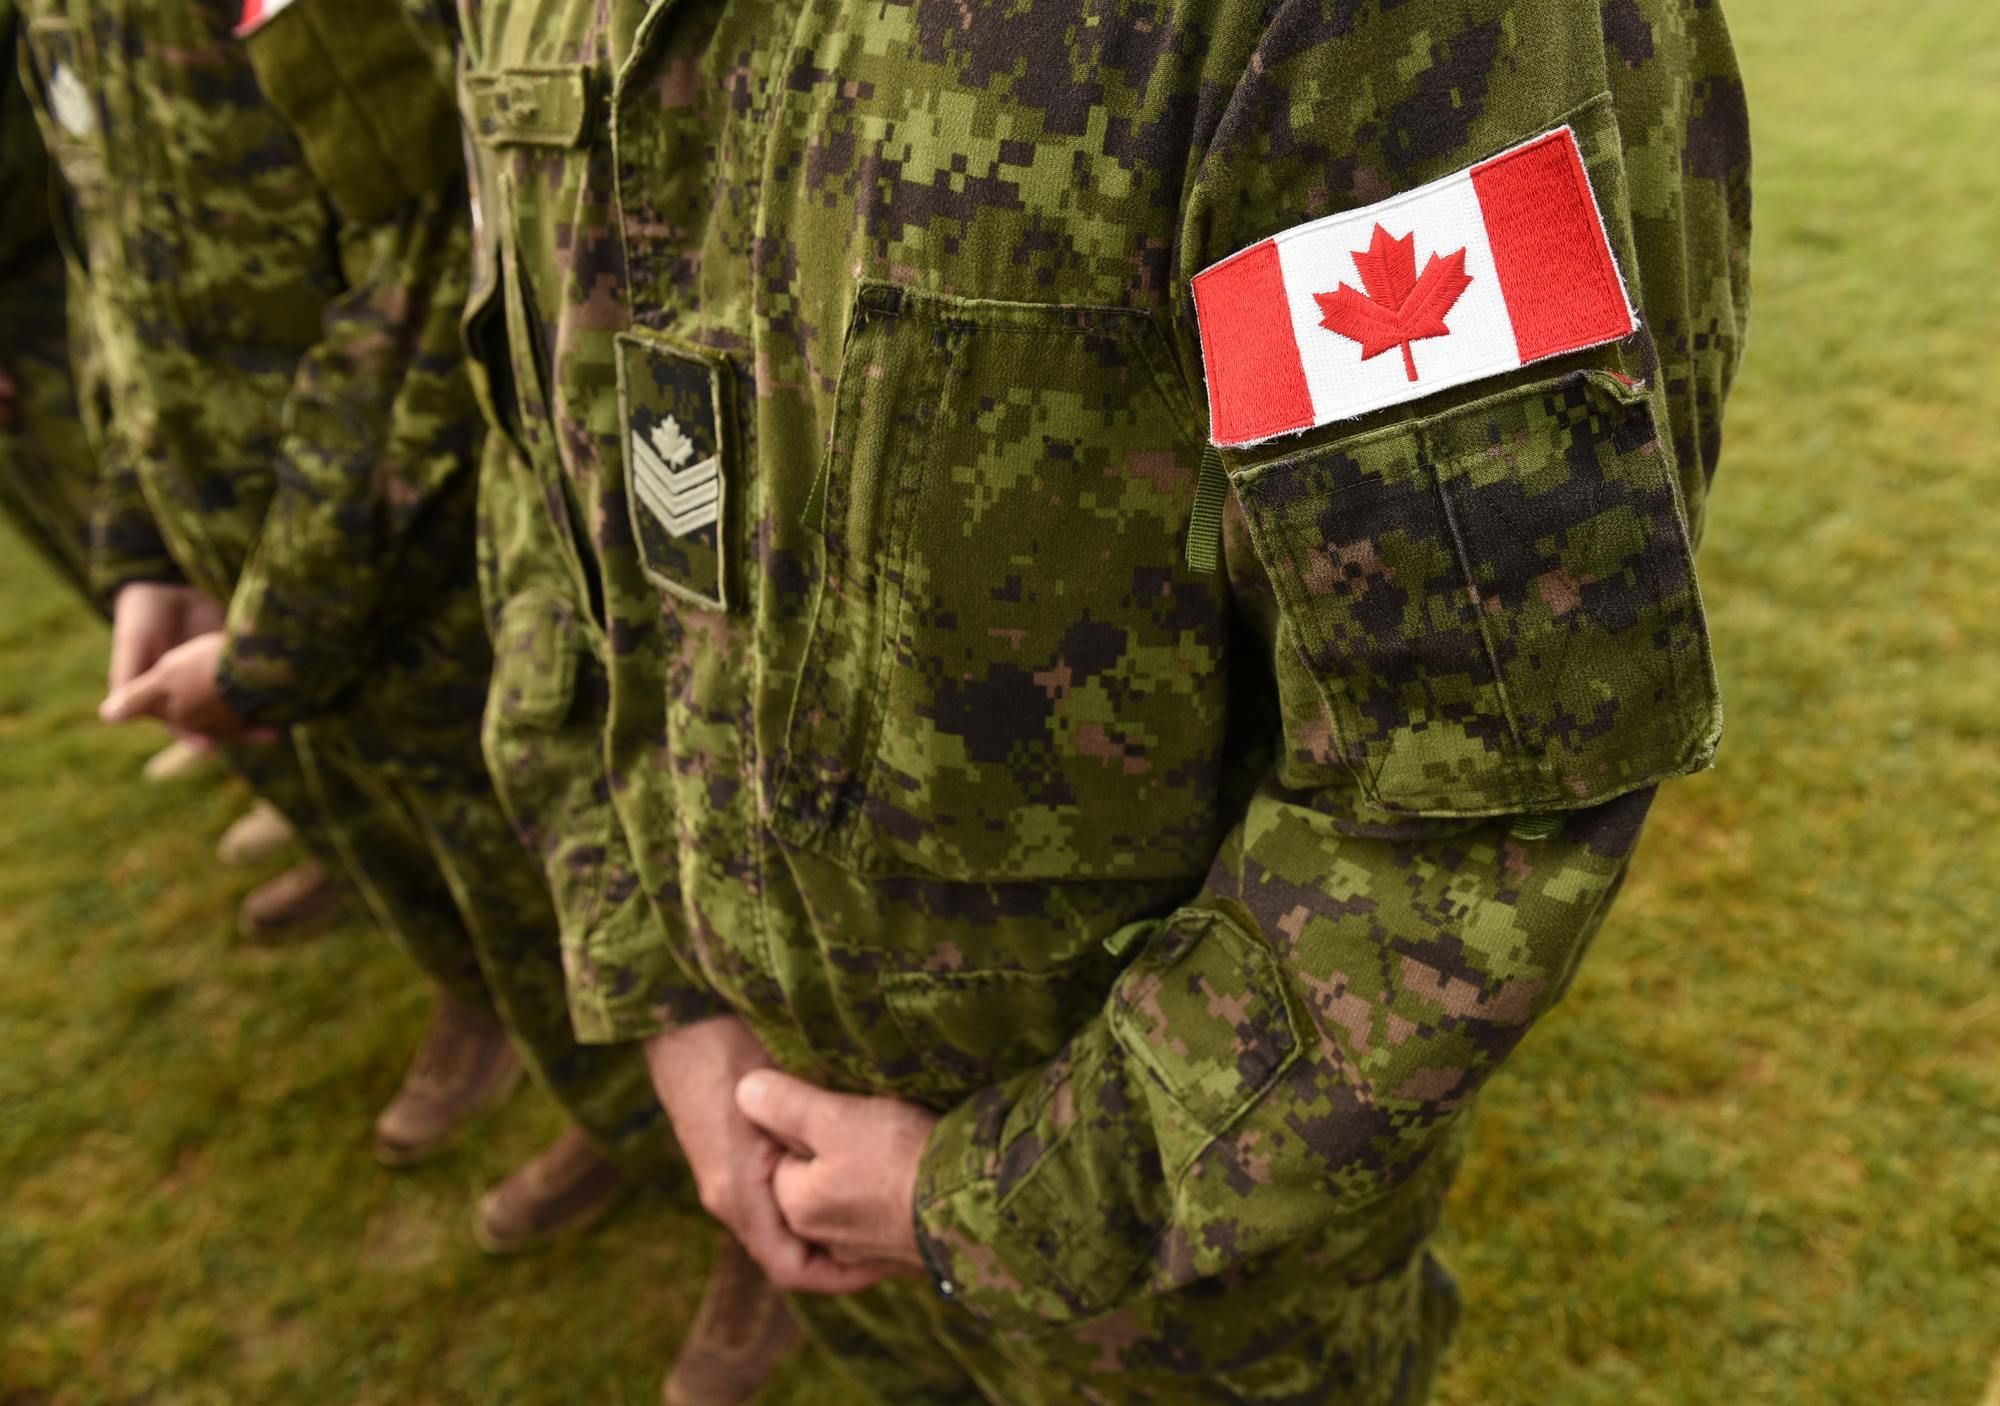 Canadian soldiers' uniforms regarding Canadian troop being called to testify in long-term care home neglect class action lawsuits 